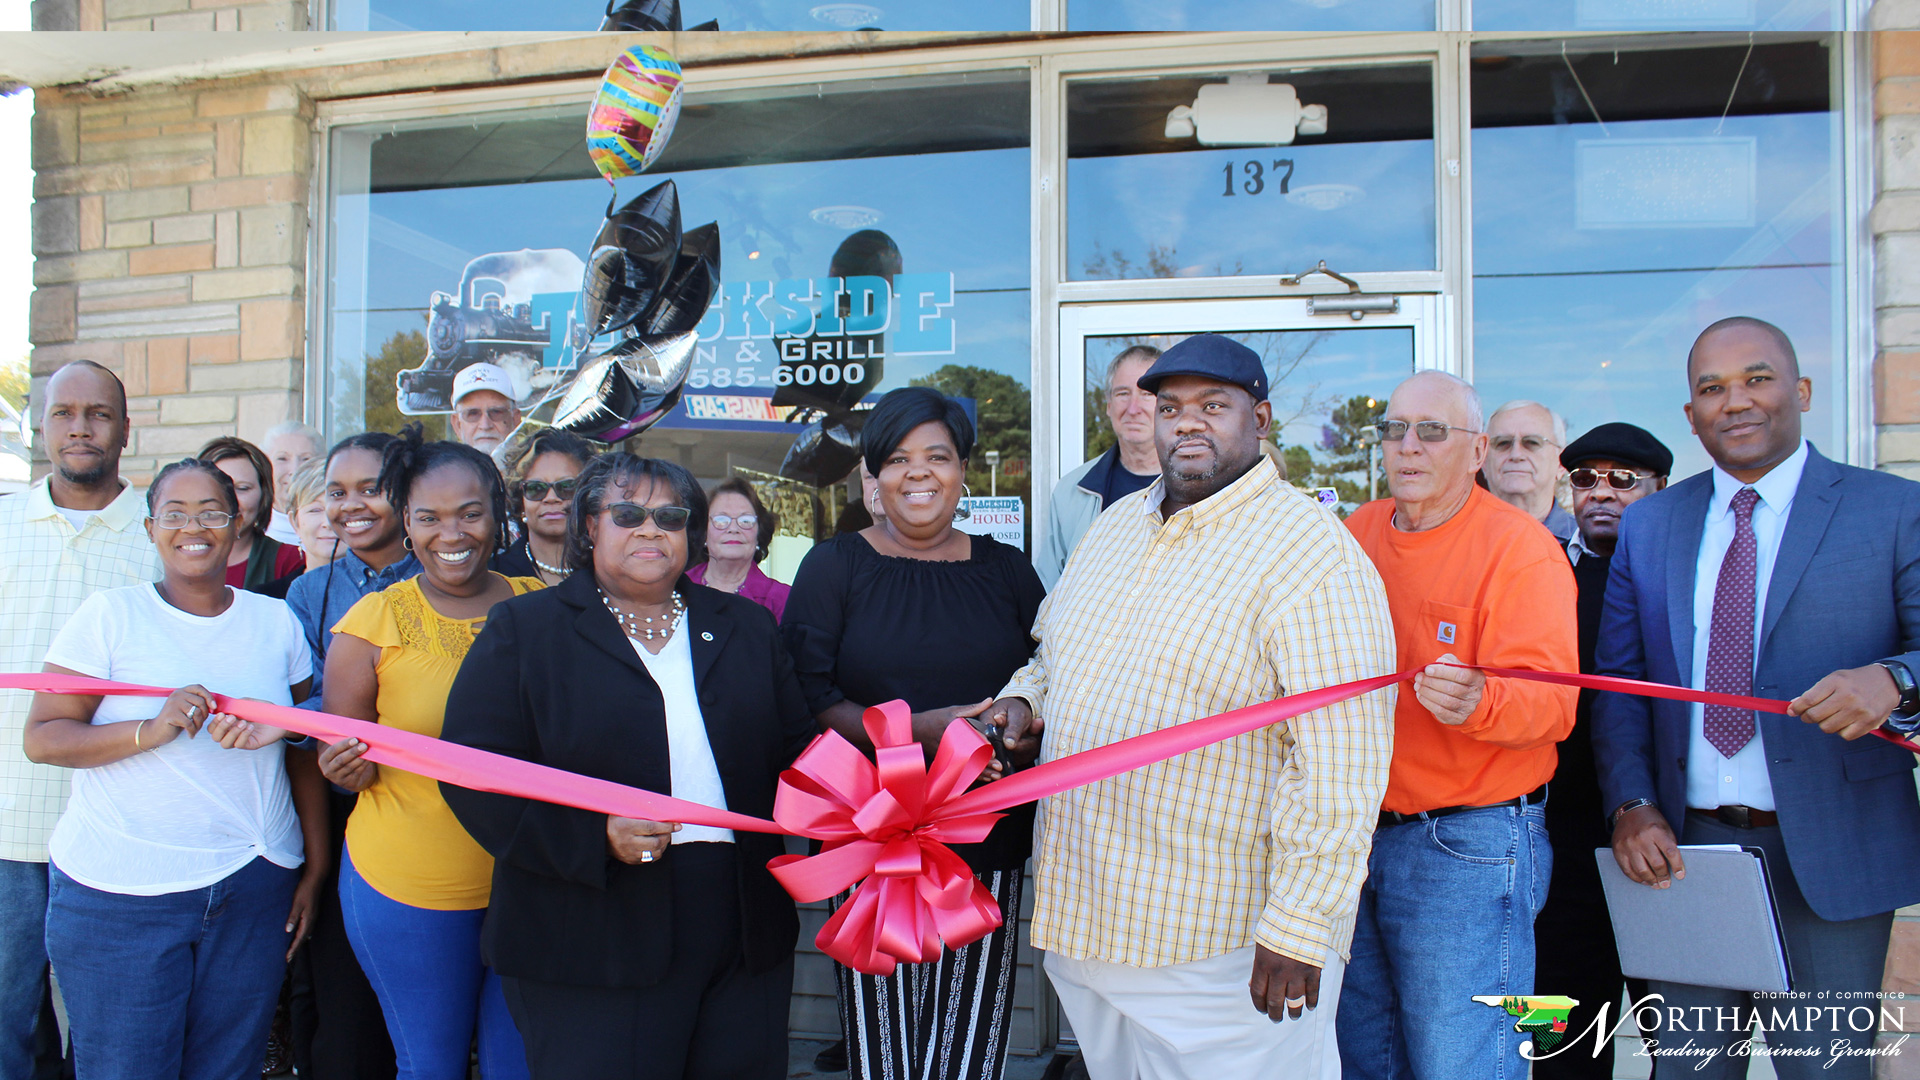 Track-Side Restaurant Conway Ribbon Cutting took place on November 4, 2019